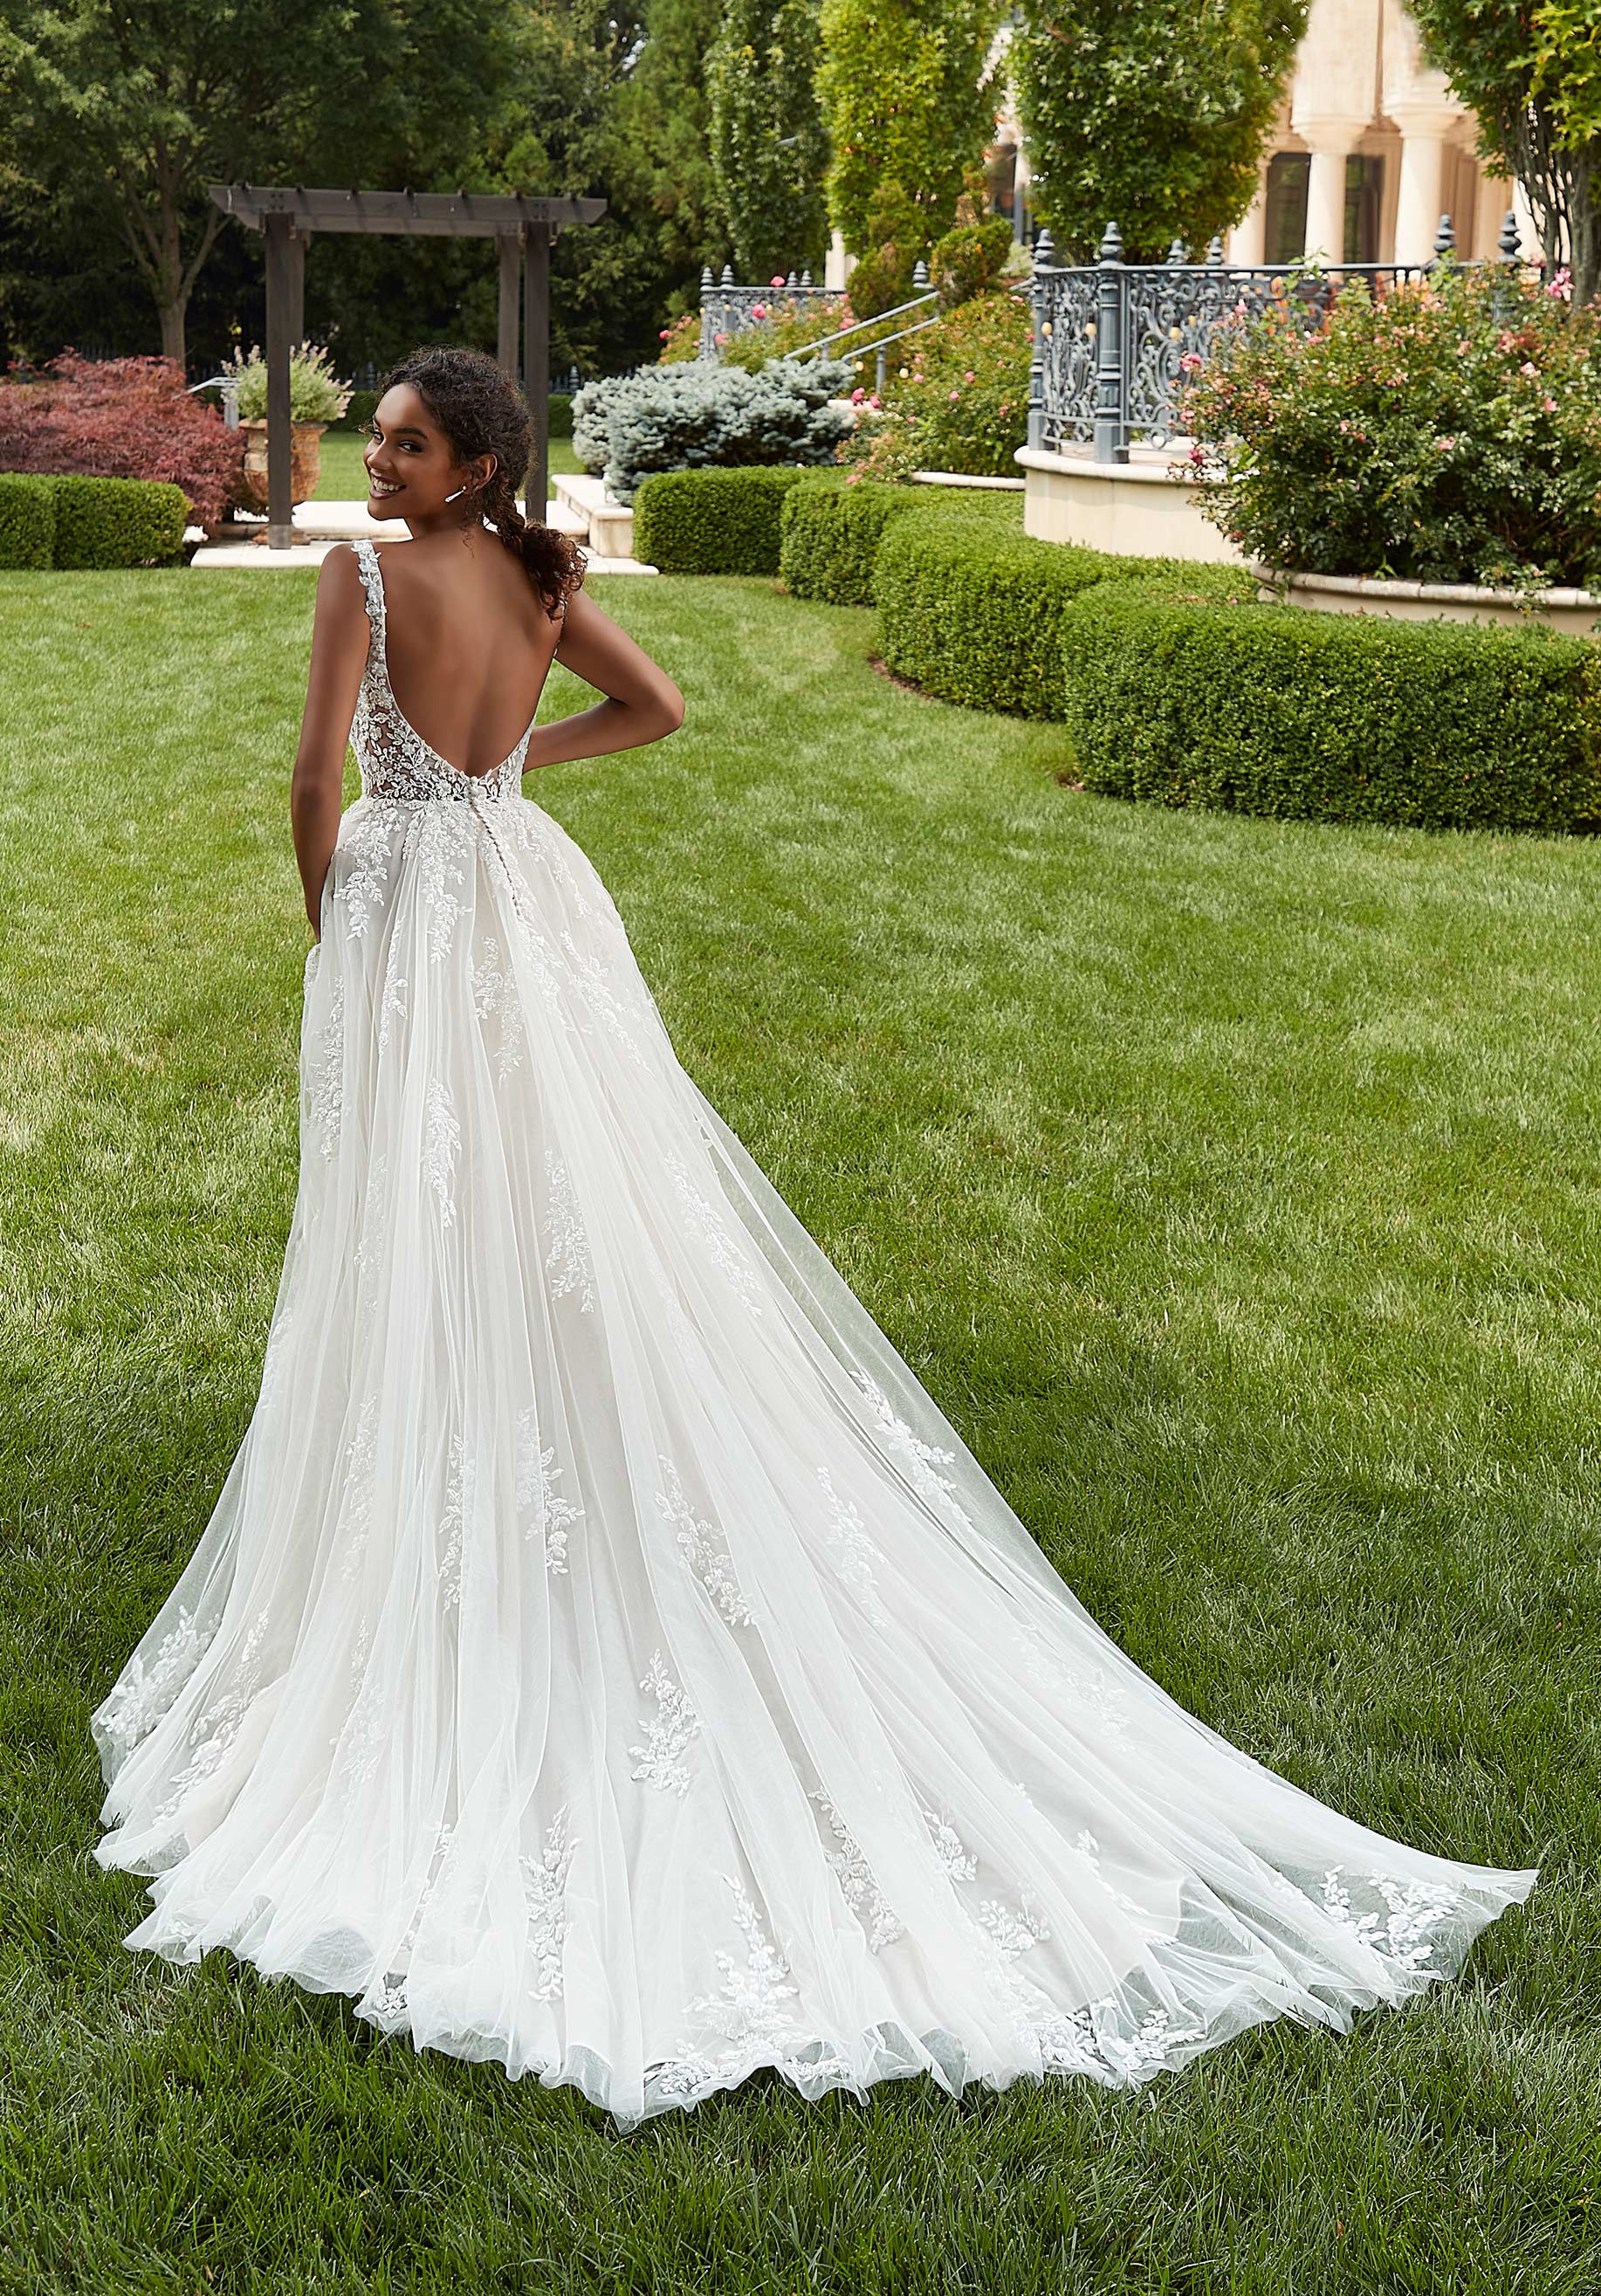 The Best Open-Back and Backless Wedding Dresses